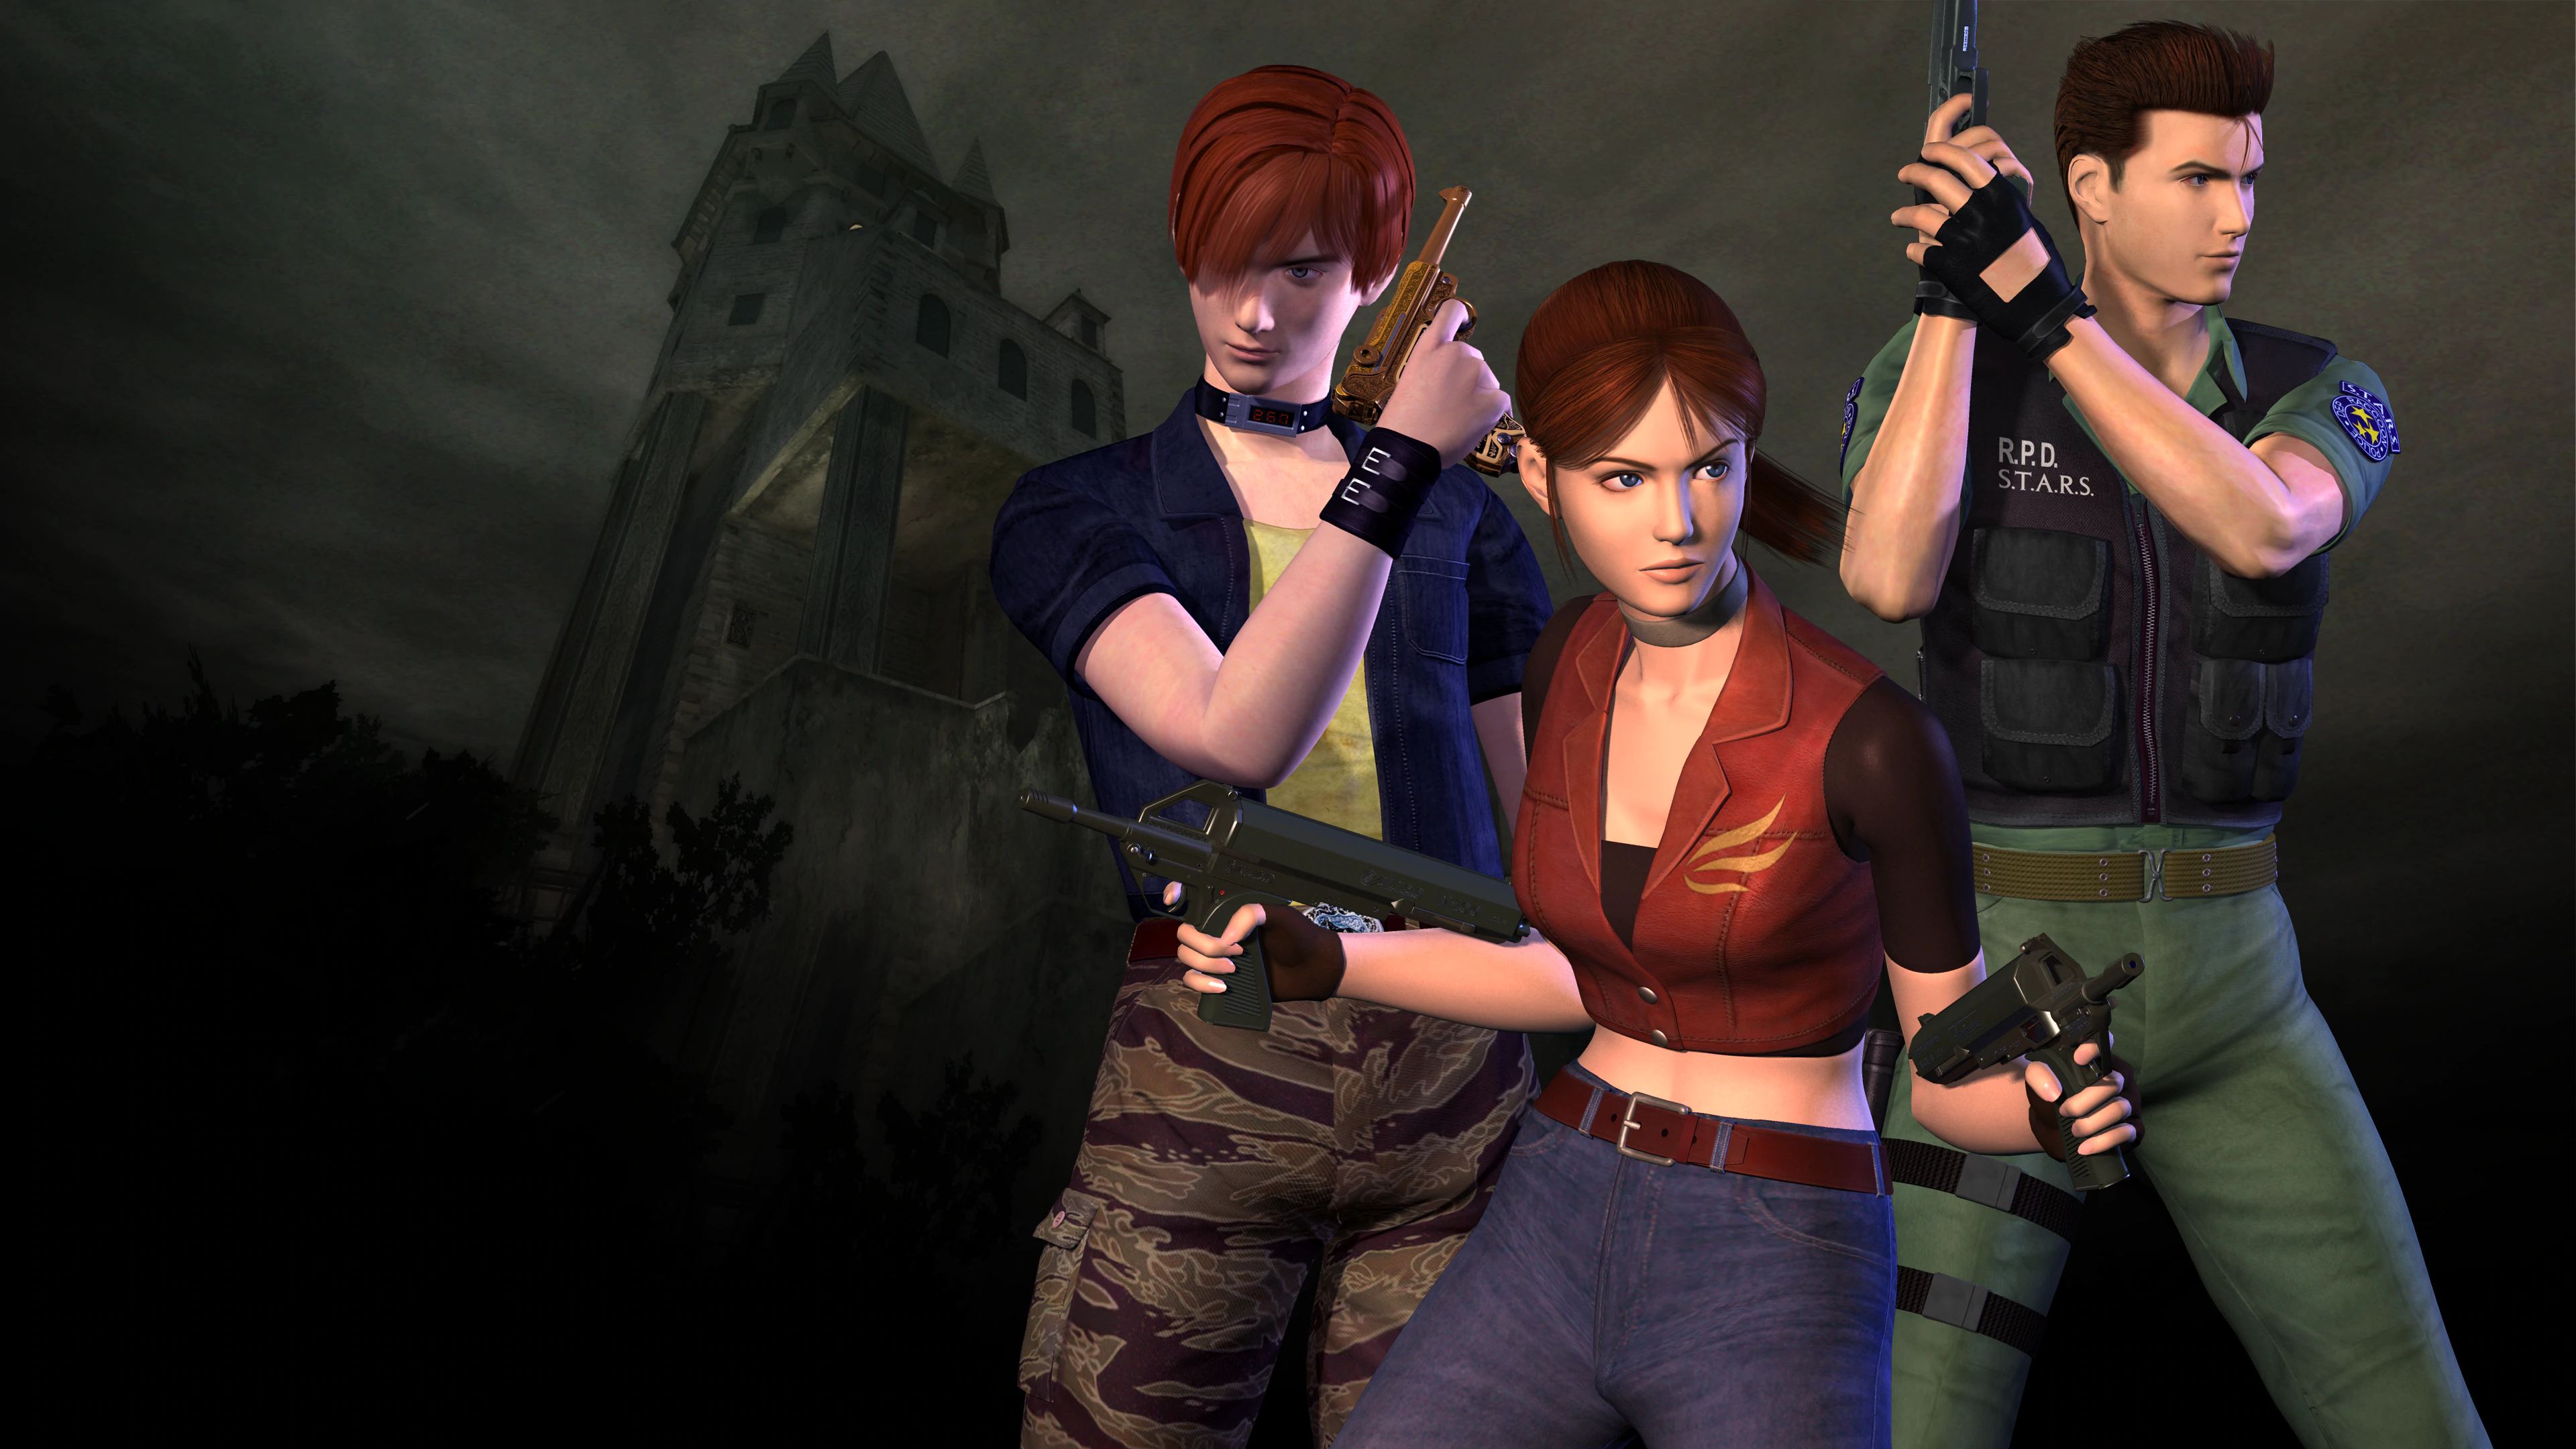 Resident Evil producer says currently 'no plans' for Code Veronica remake